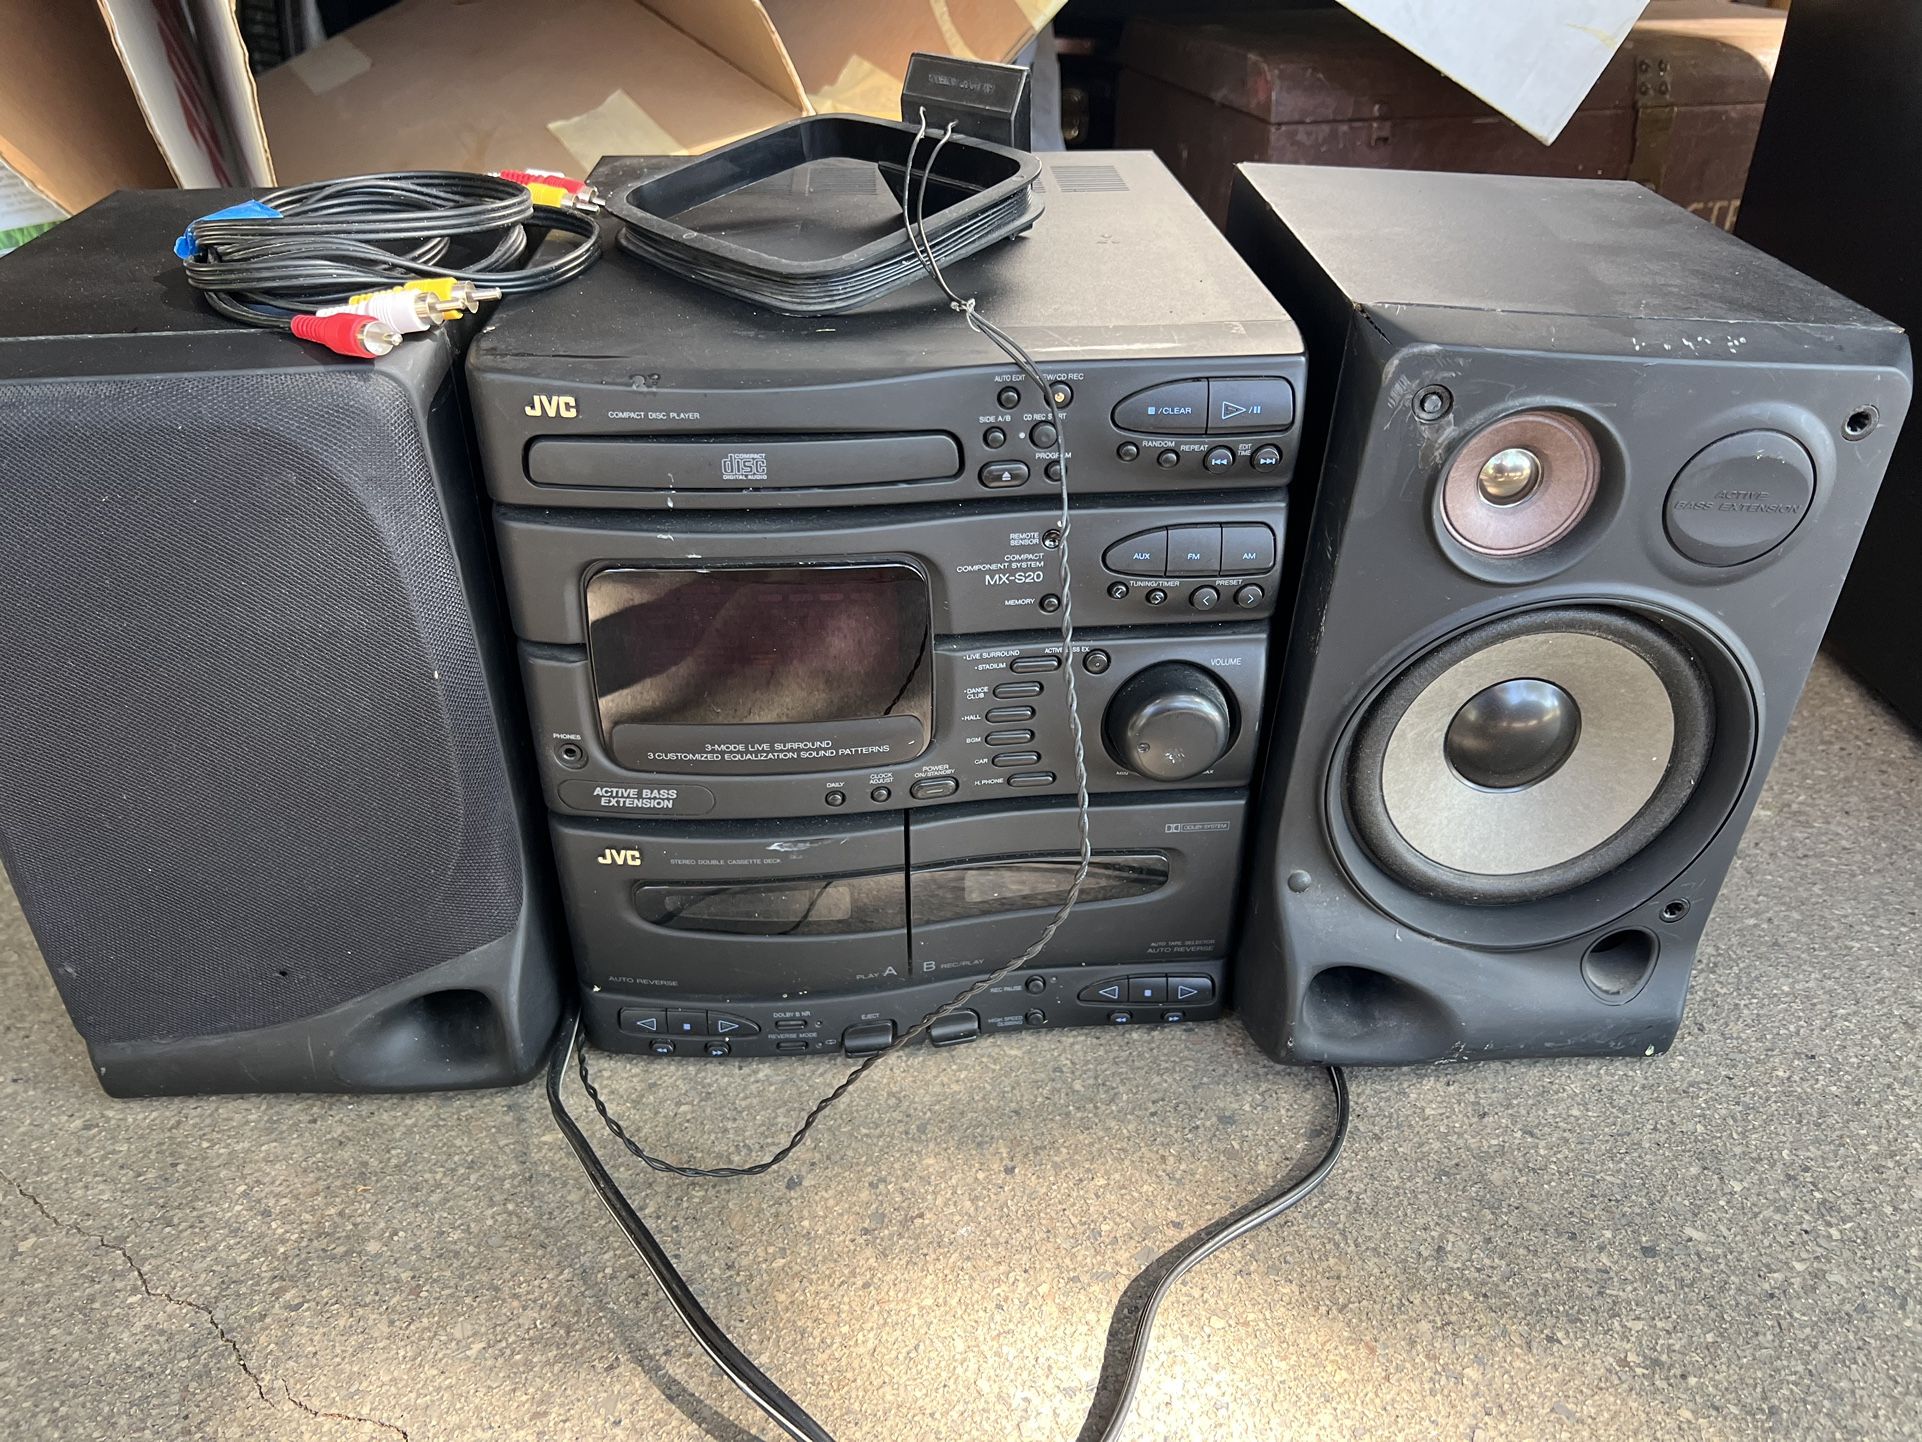 JVC Stereo And Speakers